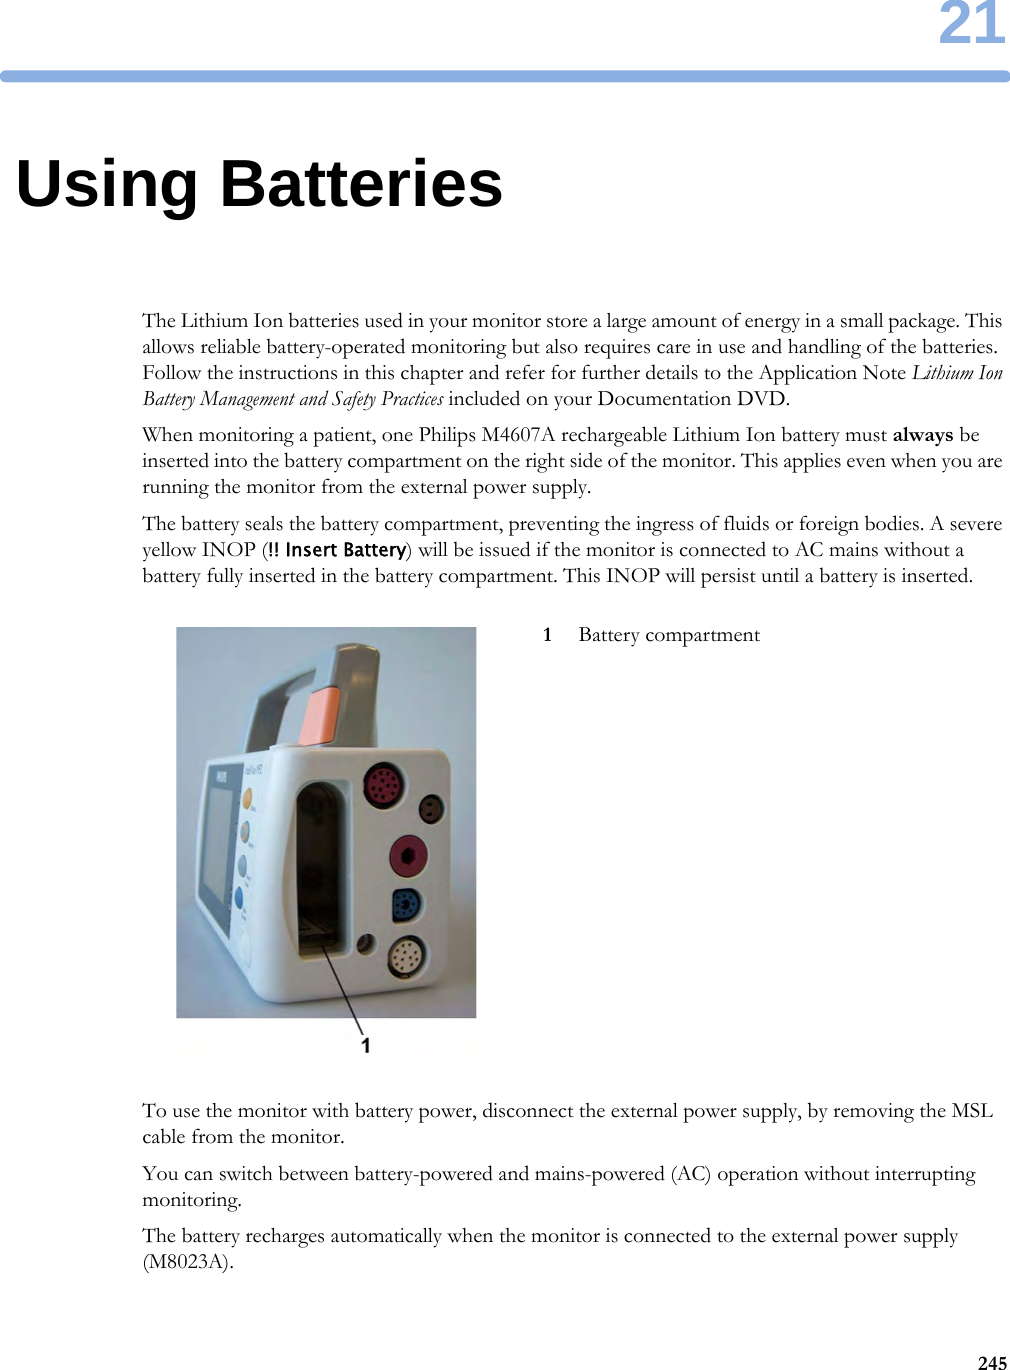 2124521Using BatteriesThe Lithium Ion batteries used in your monitor store a large amount of energy in a small package. This allows reliable battery-operated monitoring but also requires care in use and handling of the batteries. Follow the instructions in this chapter and refer for further details to the Application Note Lithium Ion Battery Management and Safety Practices included on your Documentation DVD.When monitoring a patient, one Philips M4607A rechargeable Lithium Ion battery must always be inserted into the battery compartment on the right side of the monitor. This applies even when you are running the monitor from the external power supply.The battery seals the battery compartment, preventing the ingress of fluids or foreign bodies. A severe yellow INOP (!! Insert Battery) will be issued if the monitor is connected to AC mains without a battery fully inserted in the battery compartment. This INOP will persist until a battery is inserted.To use the monitor with battery power, disconnect the external power supply, by removing the MSL cable from the monitor.You can switch between battery-powered and mains-powered (AC) operation without interrupting monitoring.The battery recharges automatically when the monitor is connected to the external power supply (M8023A).1Battery compartment